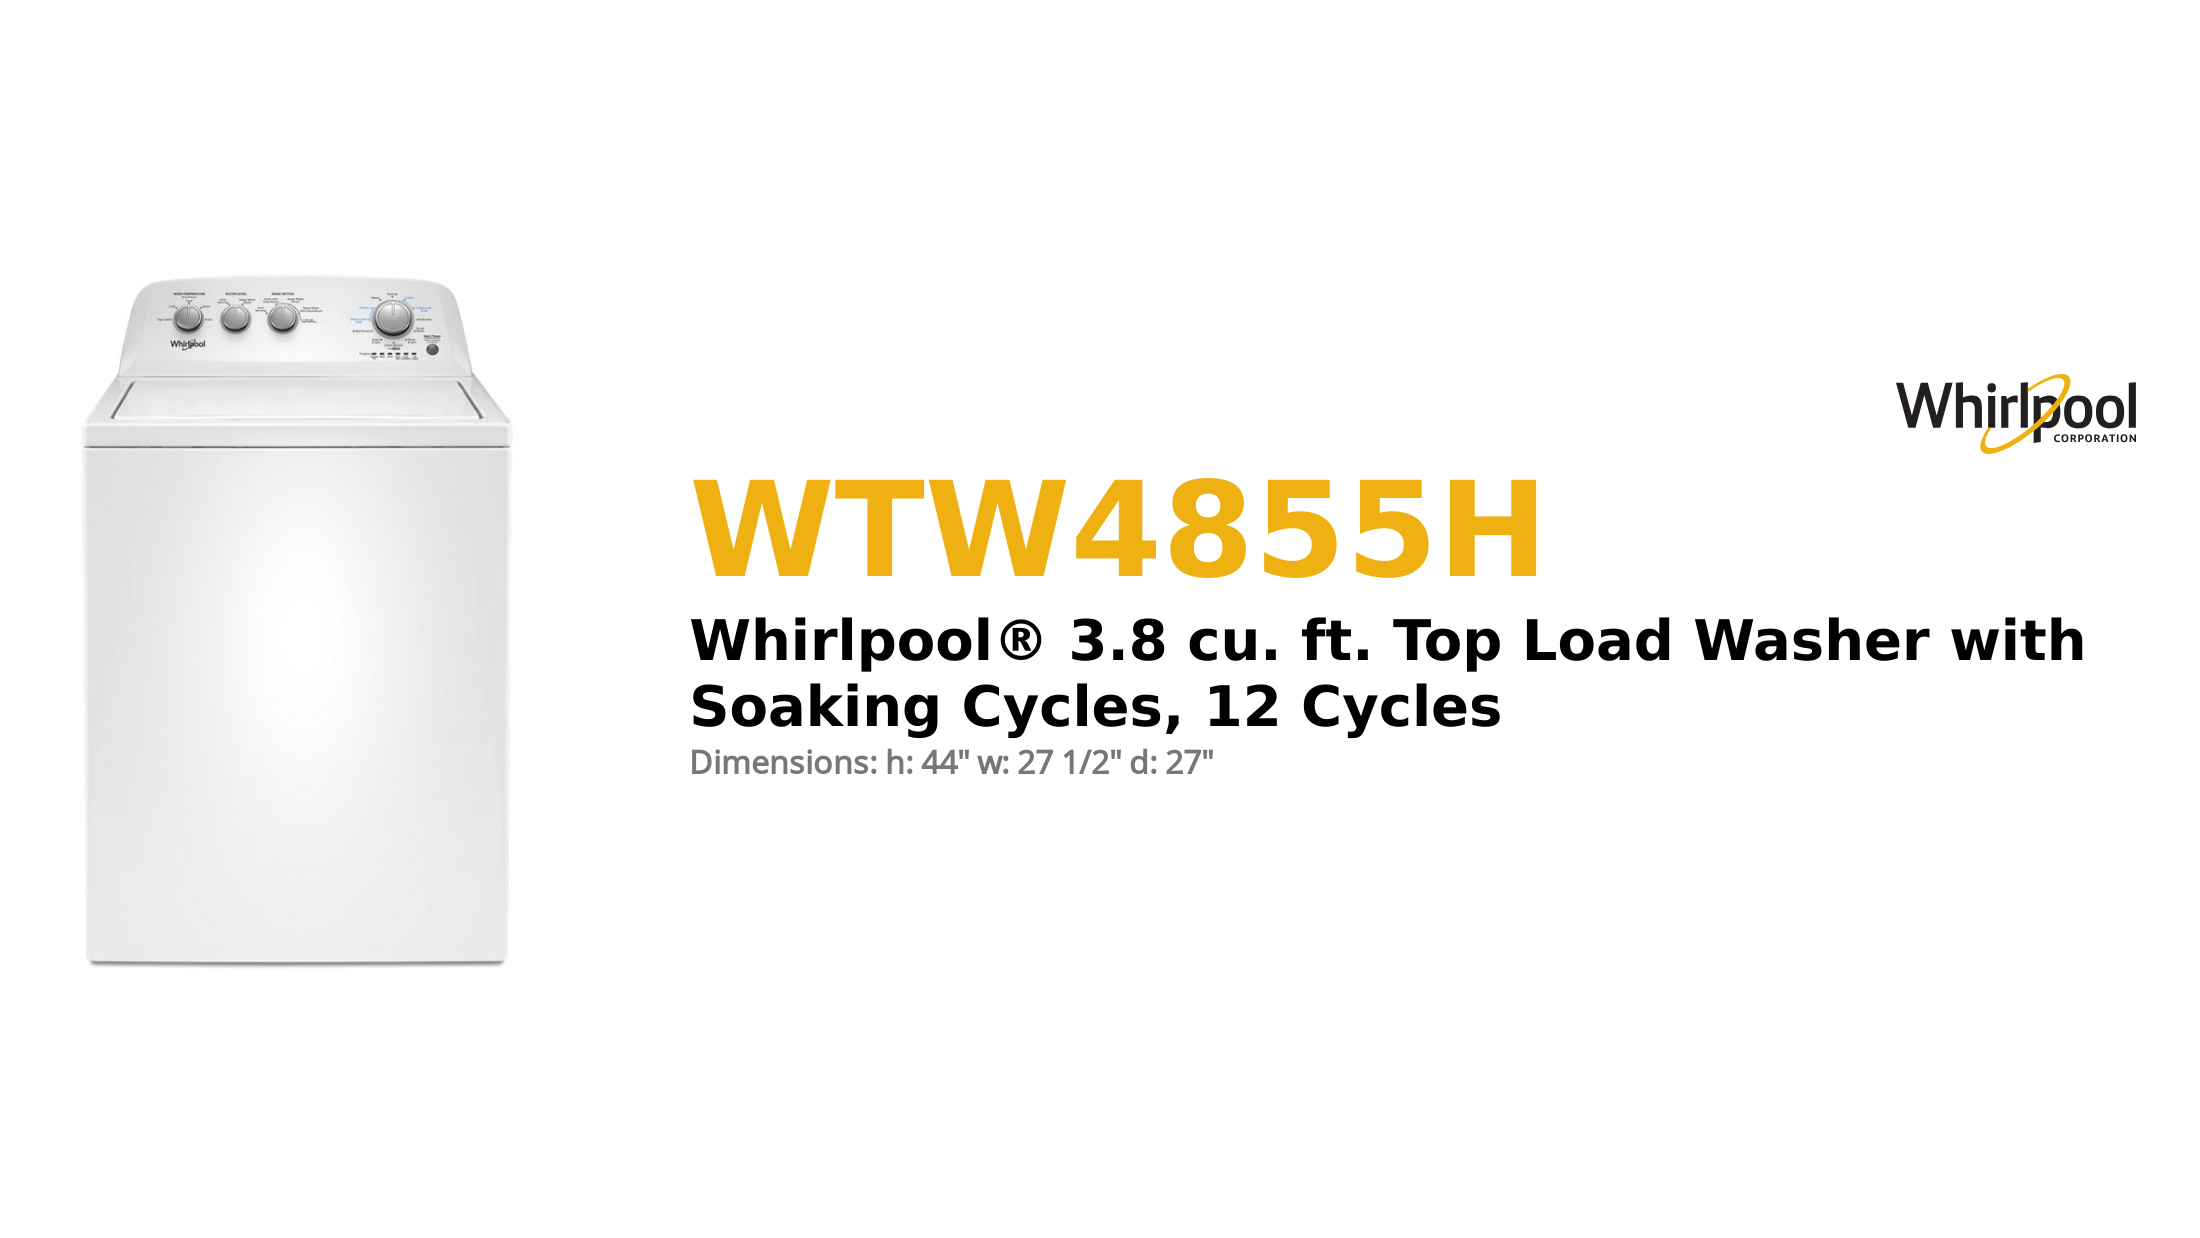 Whirlpool Top Load Washer - WTW4855HW Product Brief